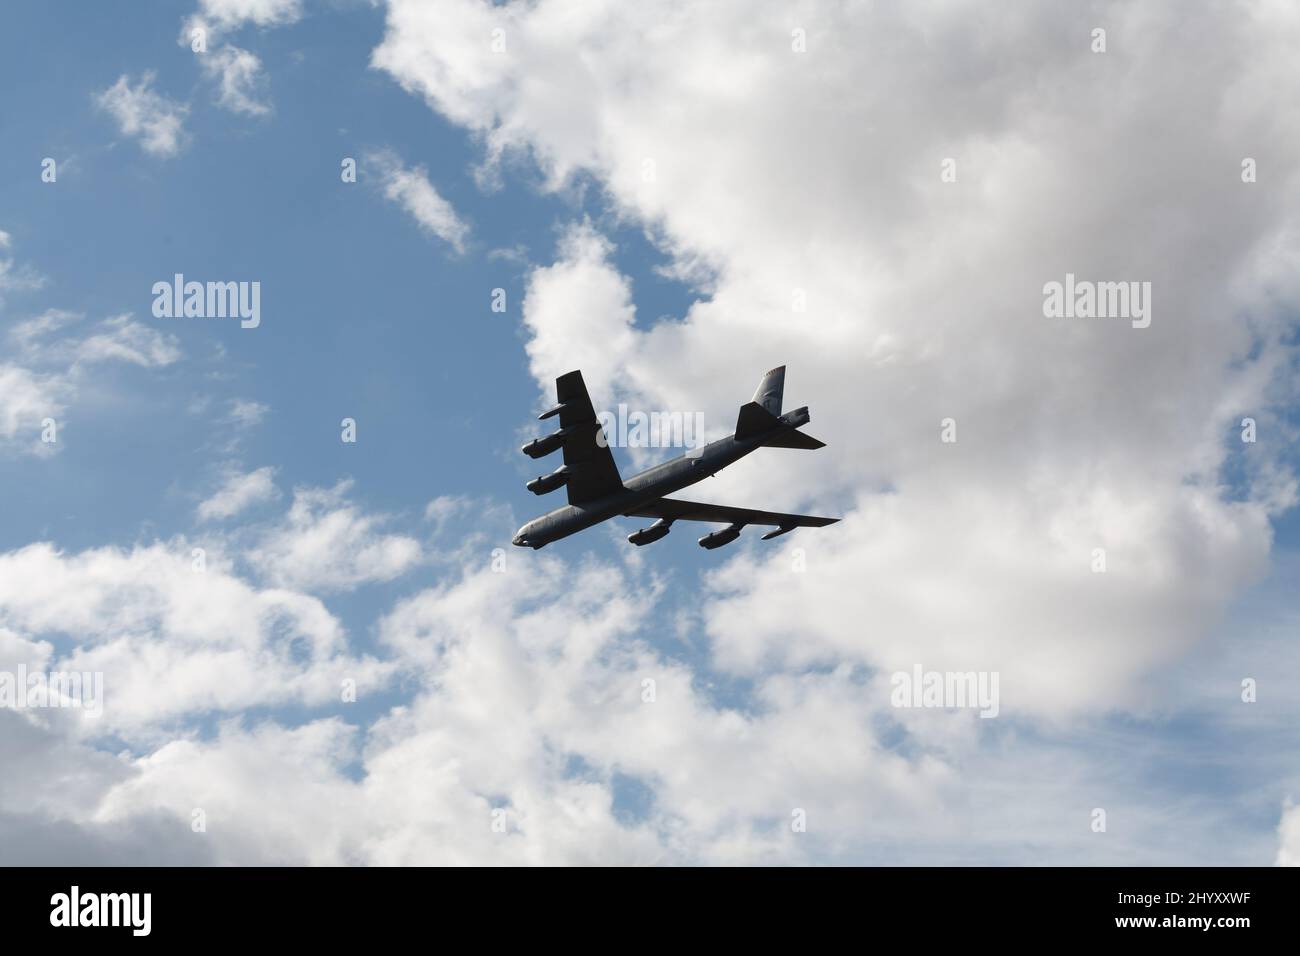 A Boeing B-52 Stratofortress bomber soars through a cloudy blue sky Stock Photo